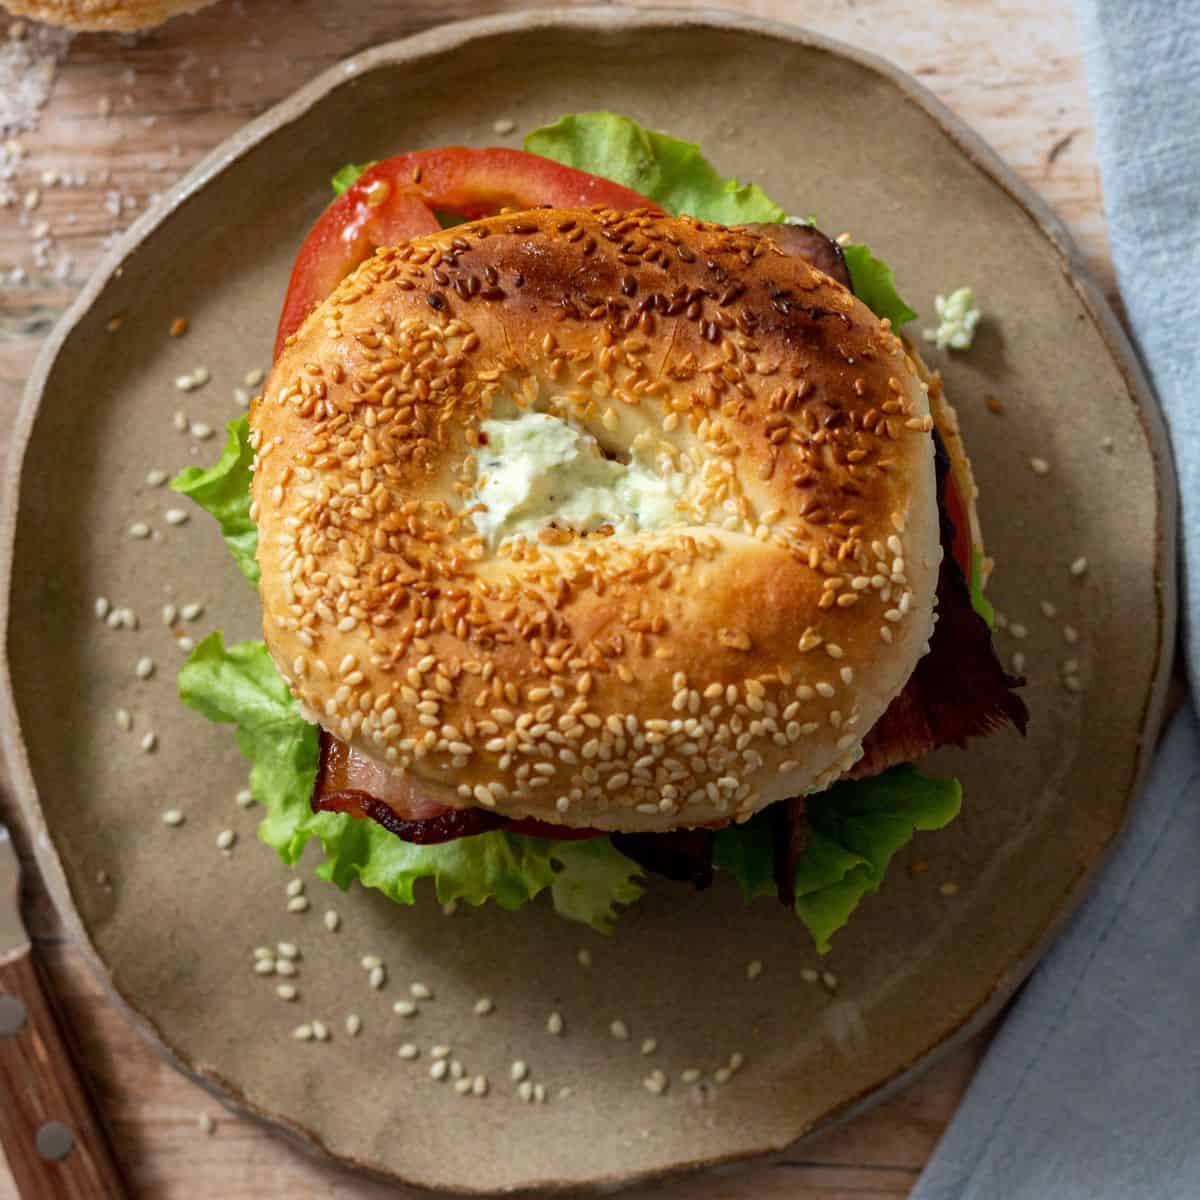 Bagel BLT on a round plate with a blue napkin.